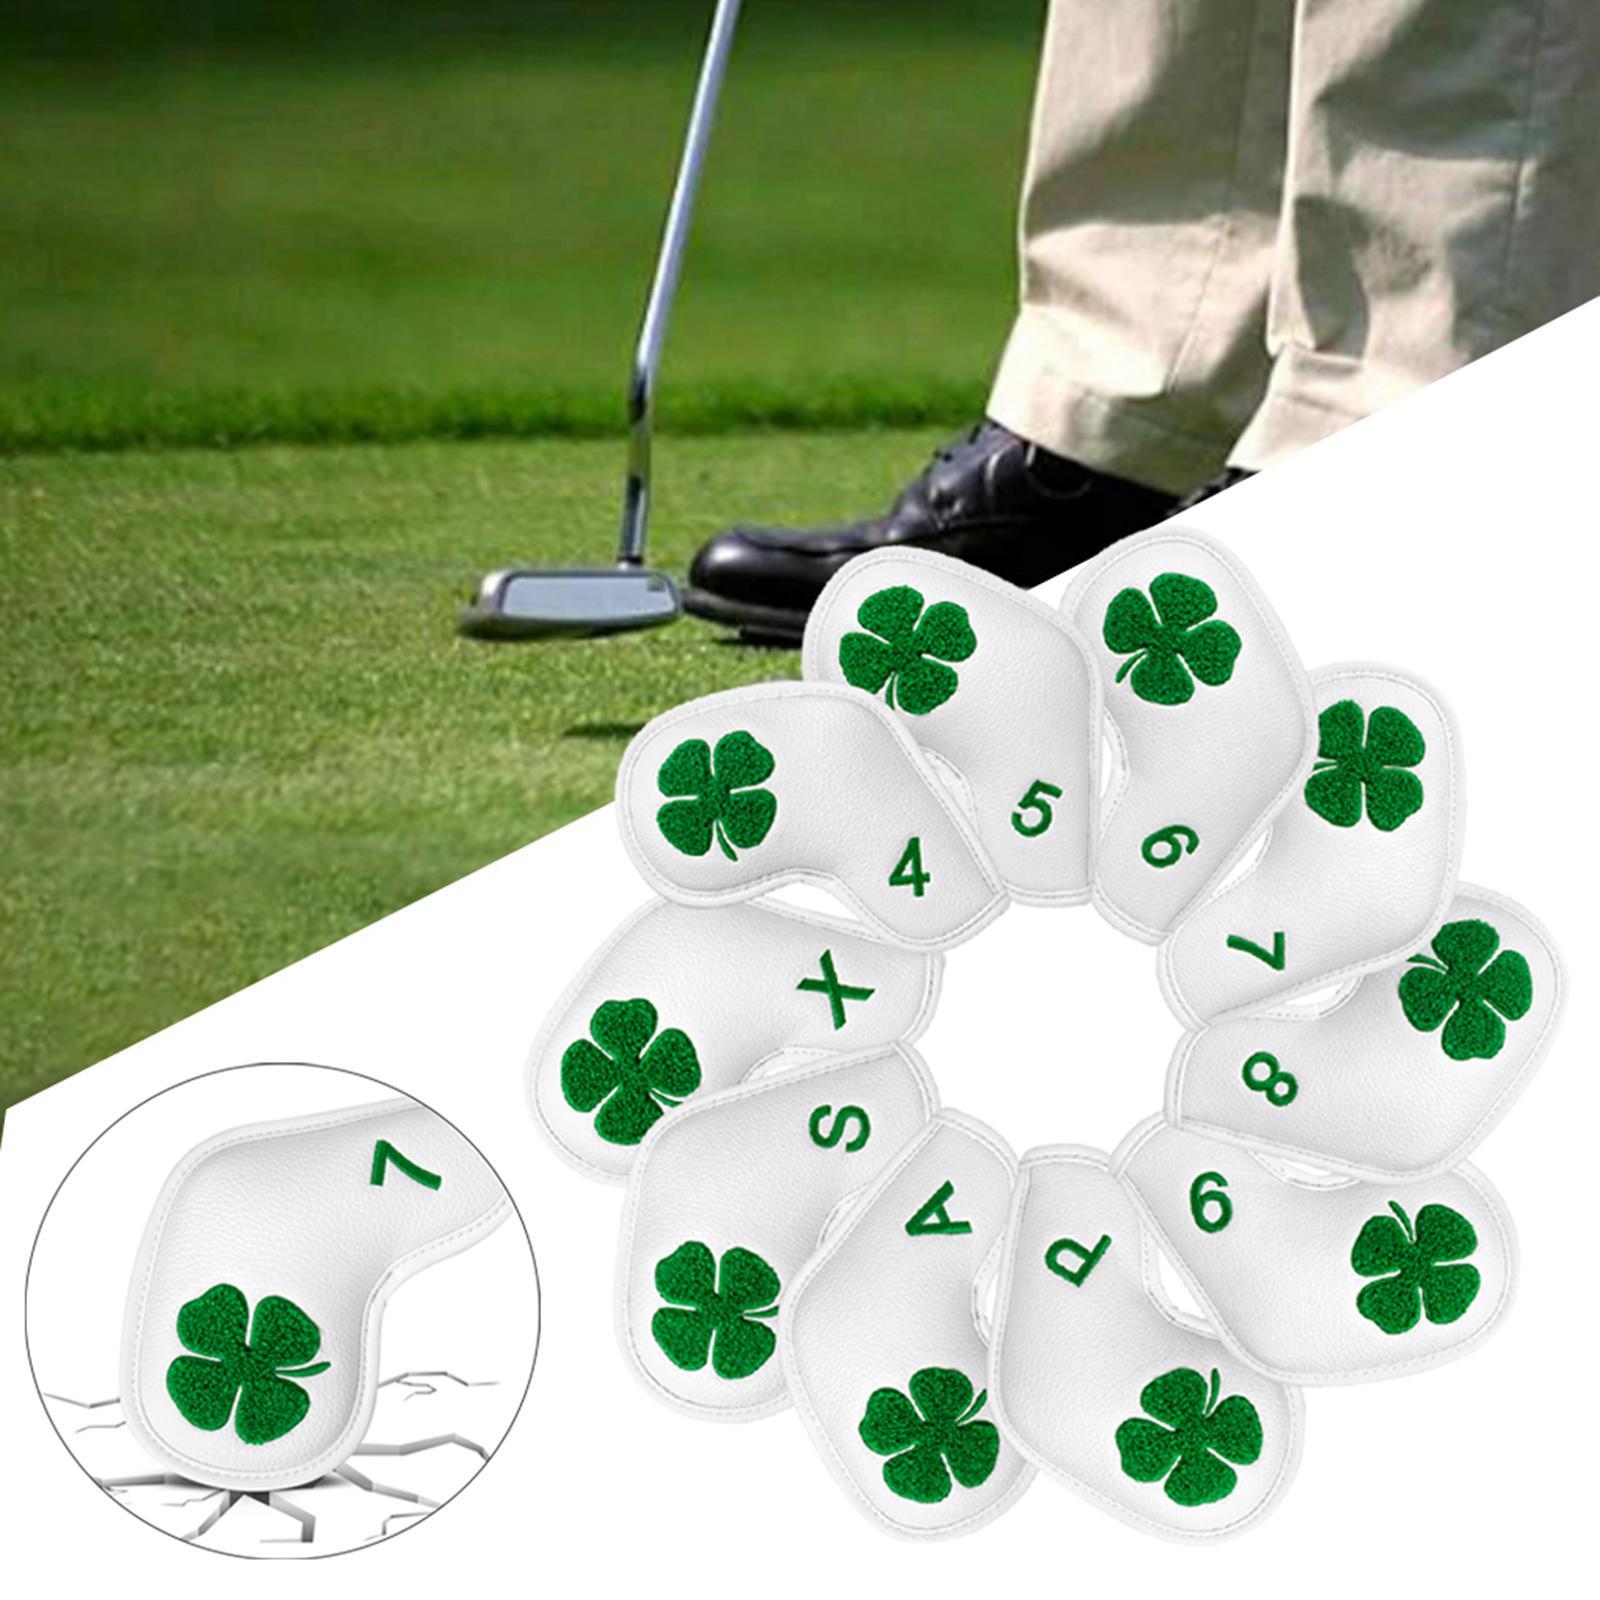 10 Pieces PU Leather Golf Iron Headcover Protector 4-9,A,S,P,X, Golf Club Head Cover Fits All Brands